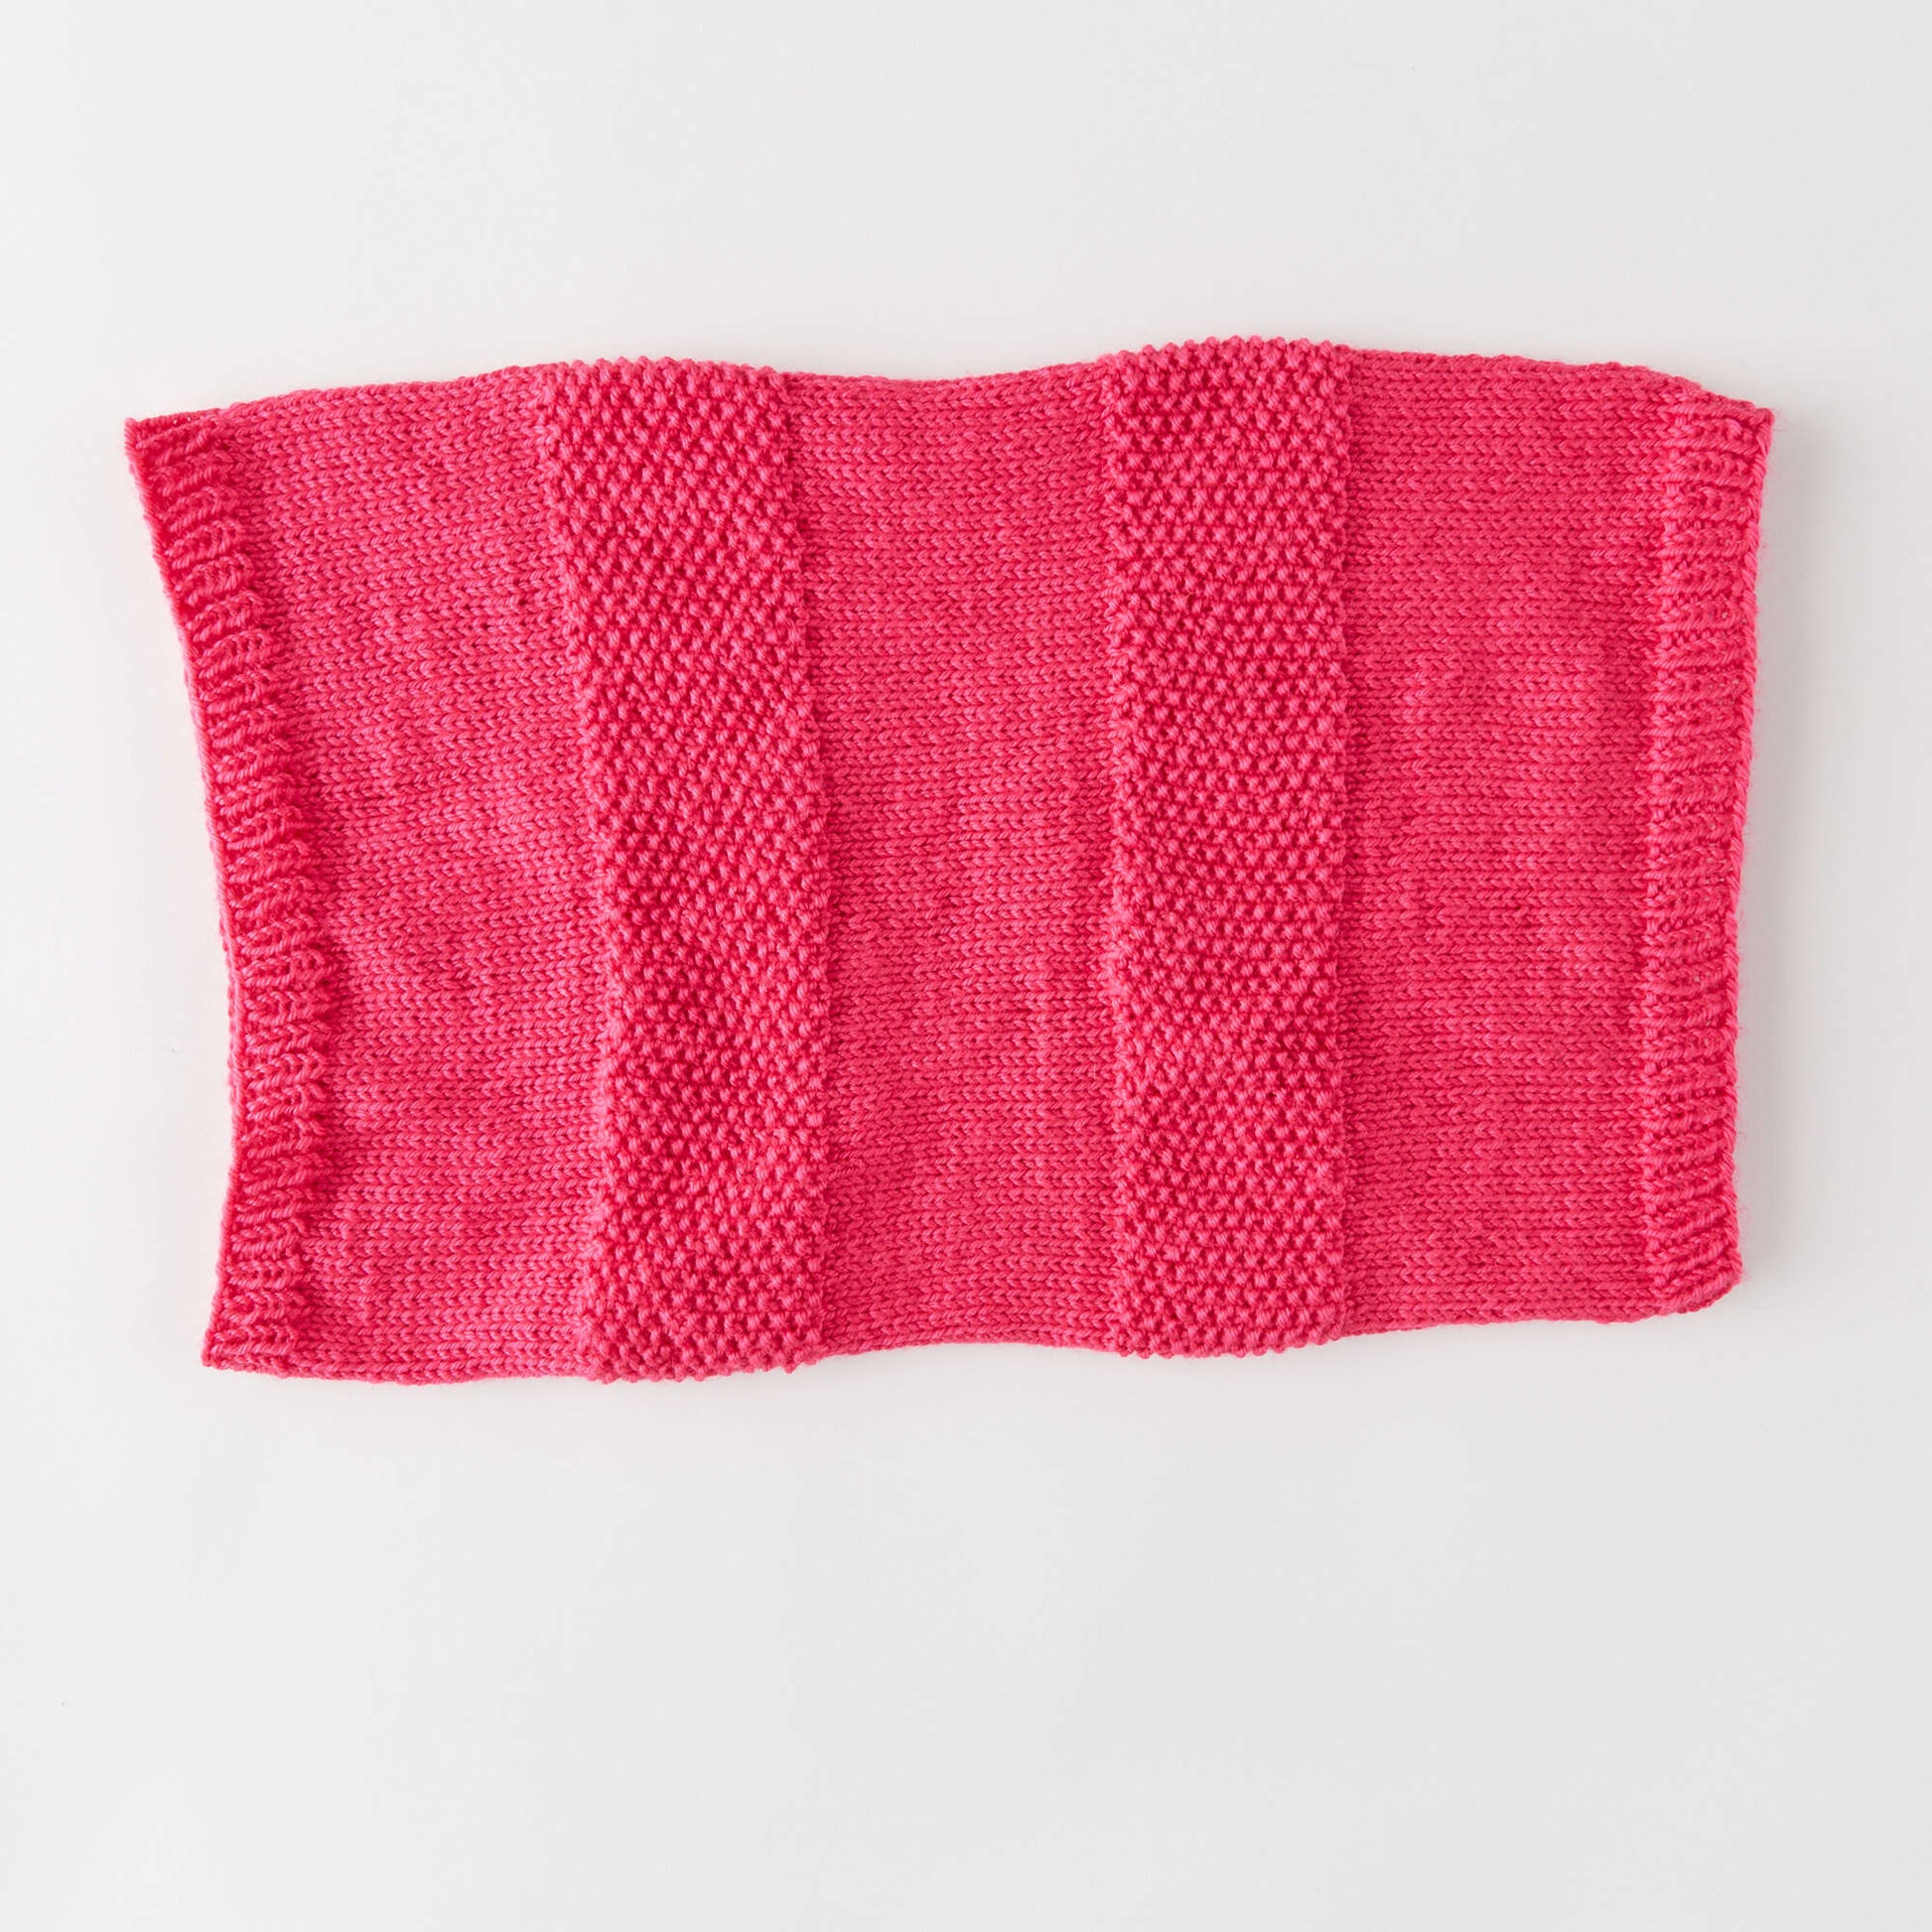 Free Red Heart Stunning Knit Cowl Pattern